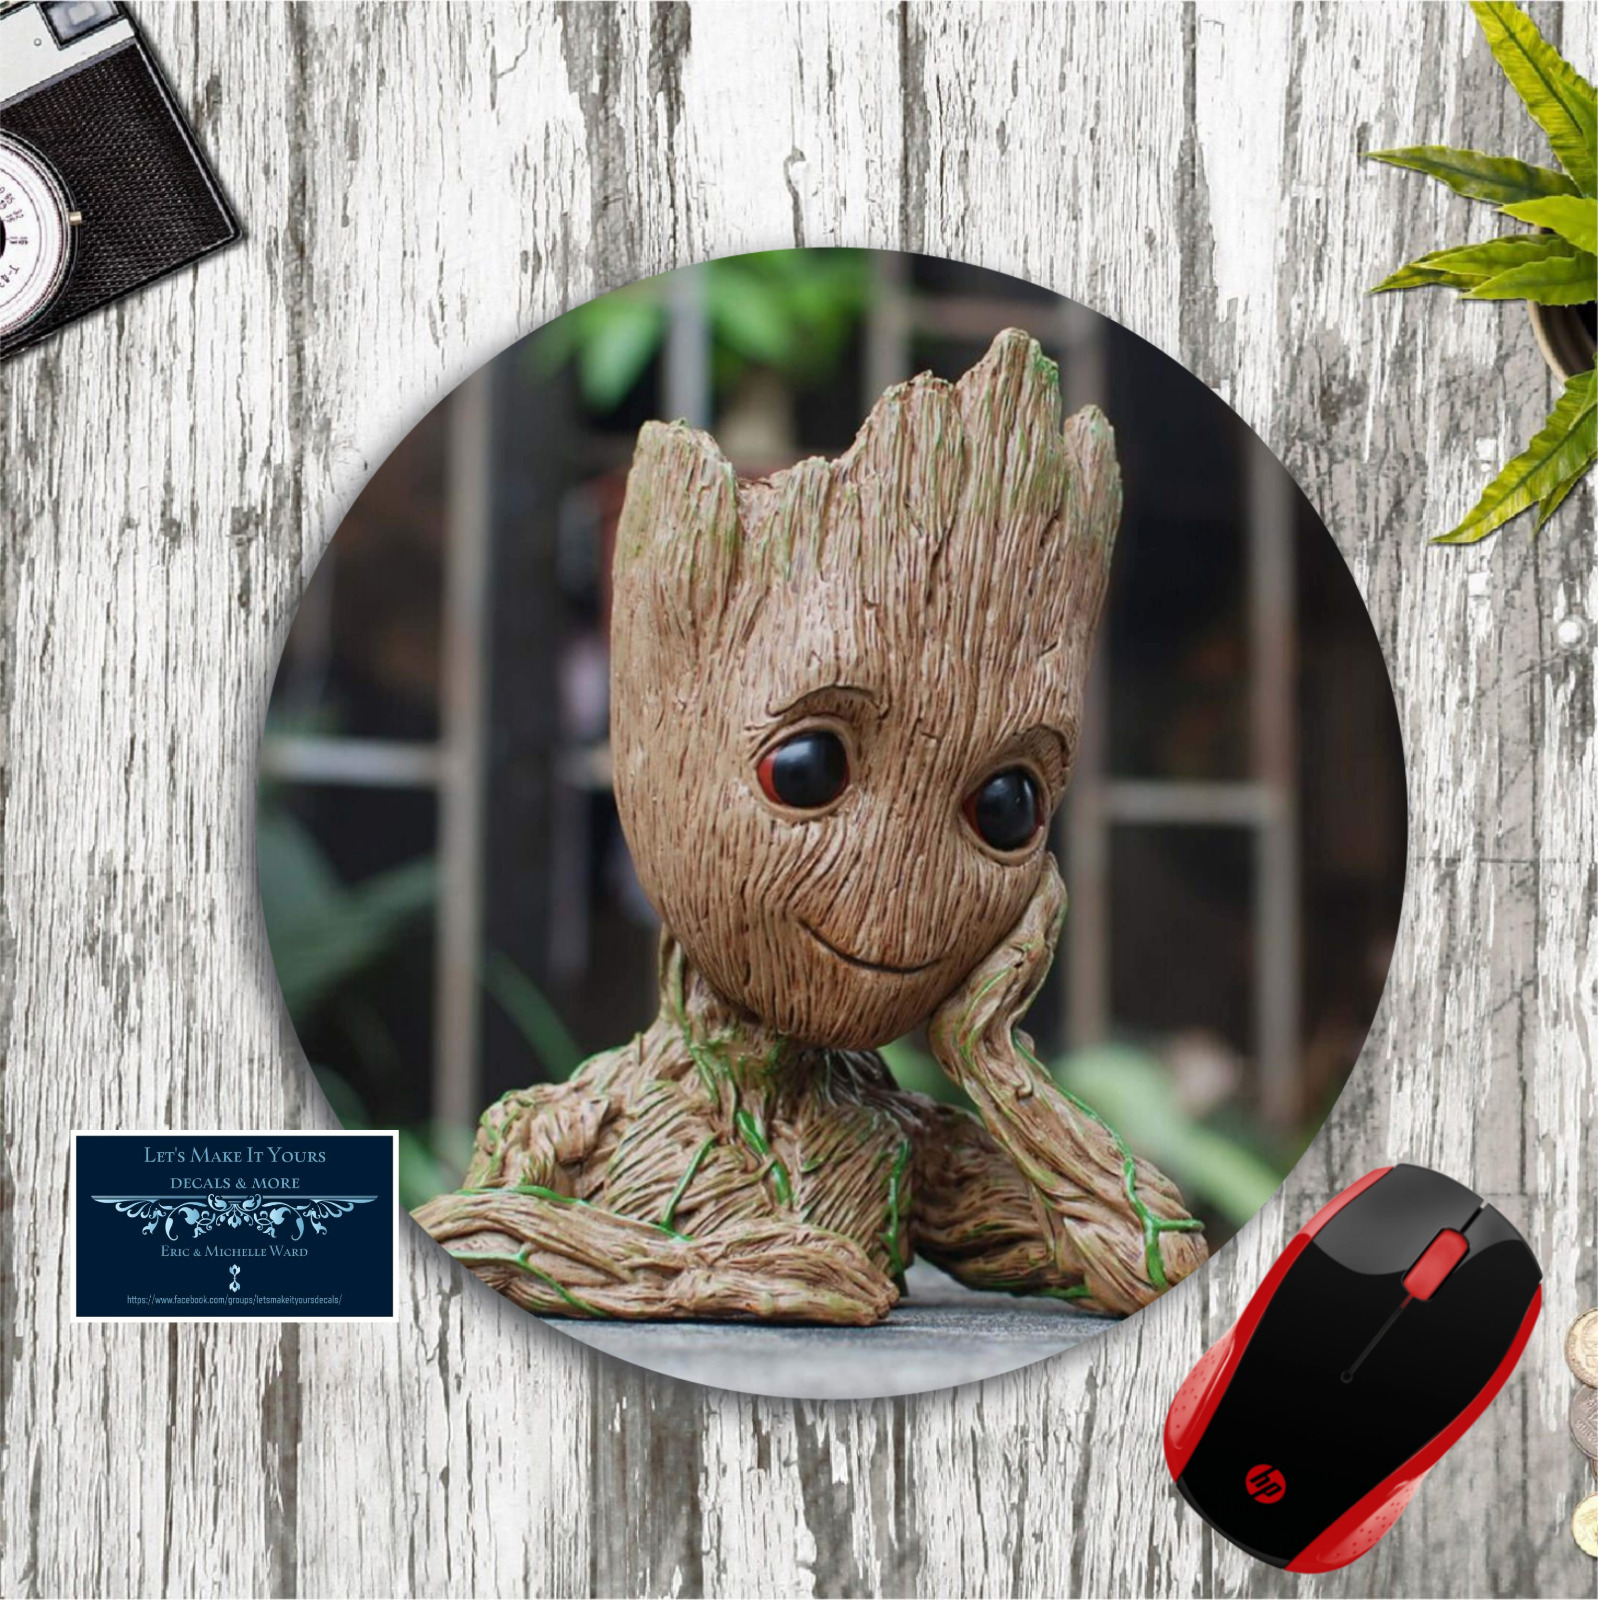 BABY GROOT THINKING CUSTOM ROUND PC DESK MAT MOUSE PAD HOME SCHOOL OFFICE GIFT